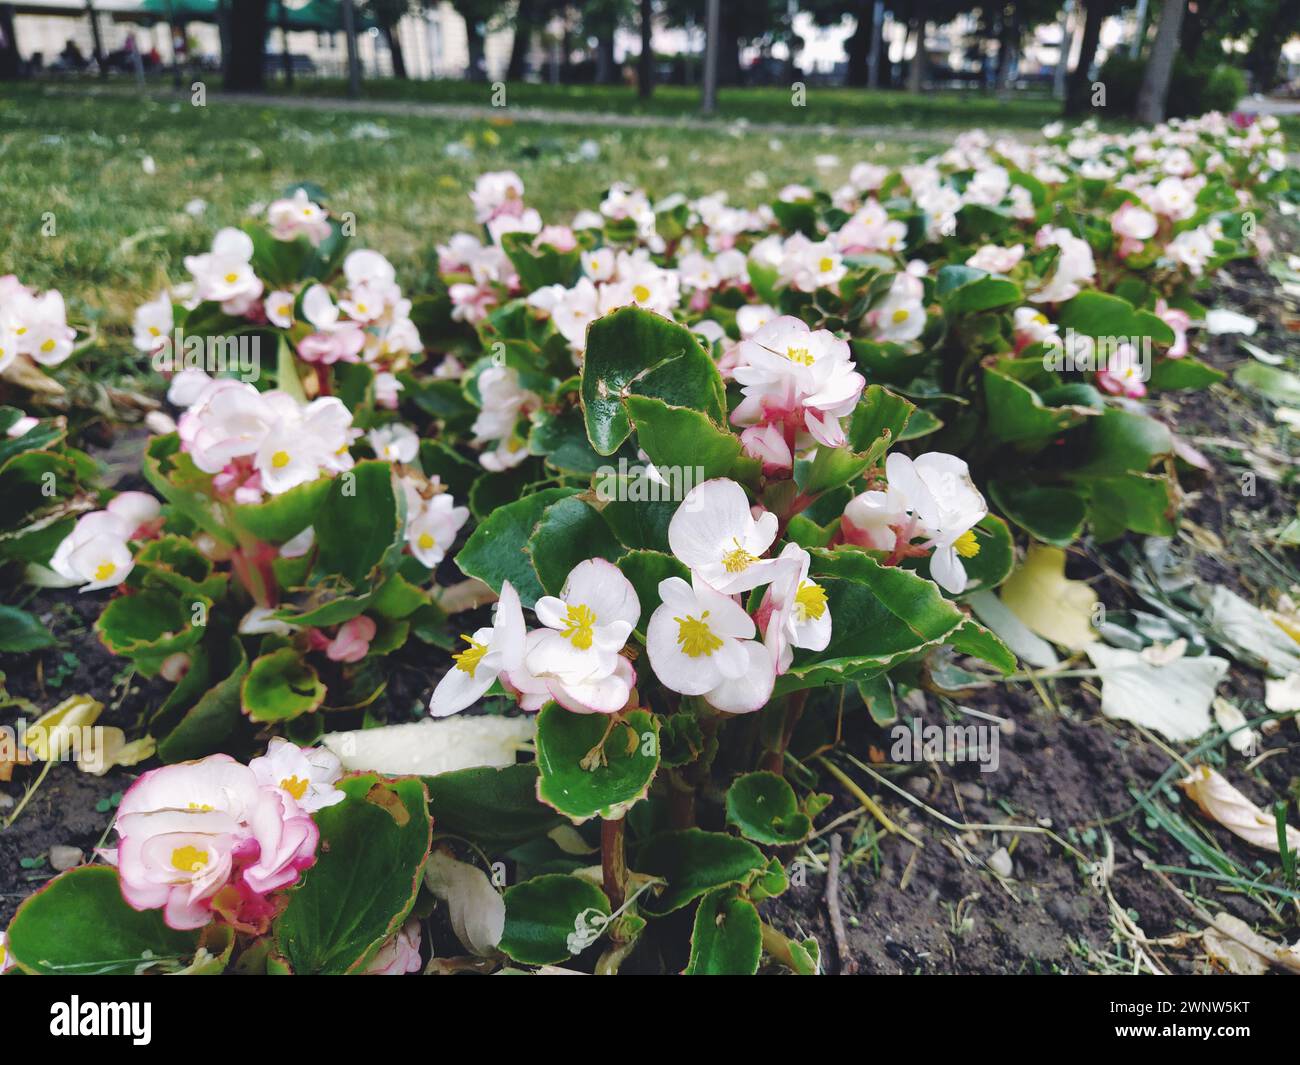 Begonia is a genus of plants in the Begonia family. Decorative gardening. Decoration of lawns, parks, flower beds, city streets and avenues. Begonia Stock Photo